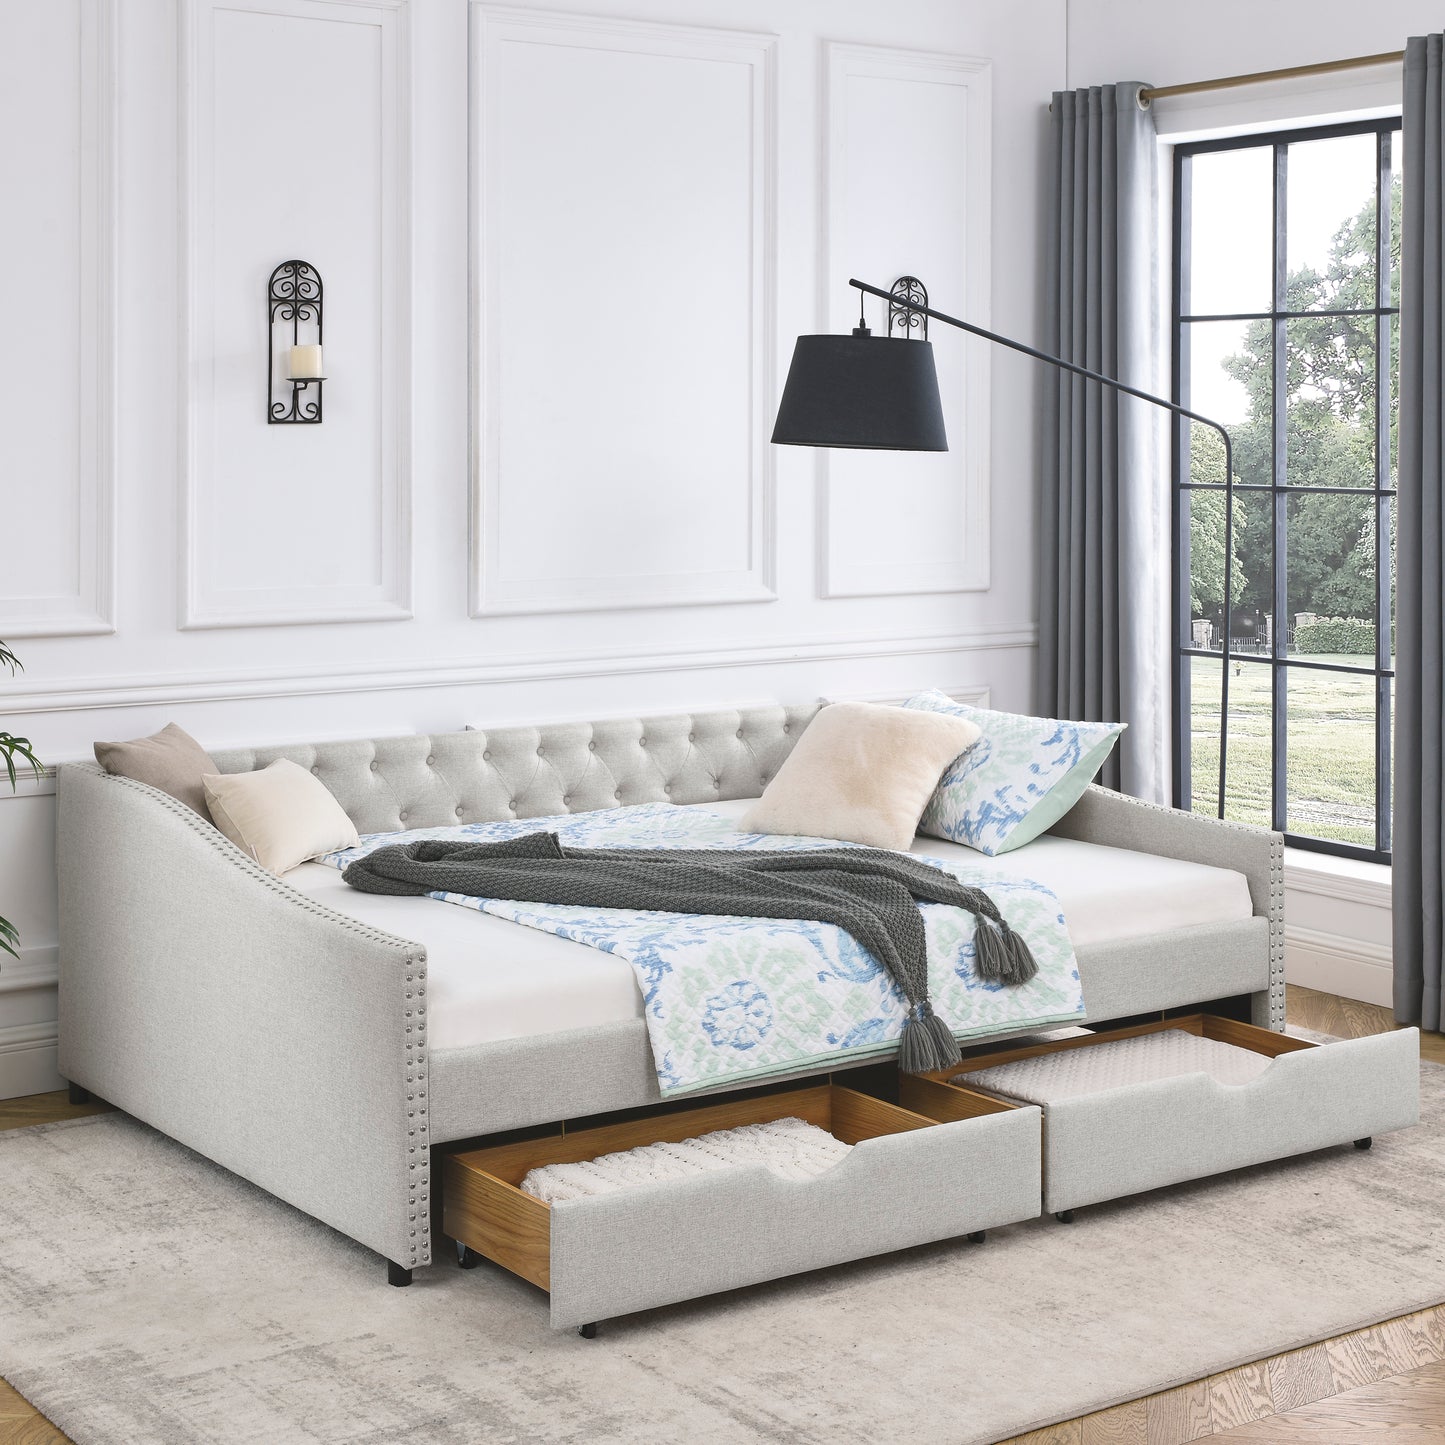 Queen Size Upholstered Tufted Daybed with Drawers, Button on Back and Copper Nail on Waved Shape Arms, Beige